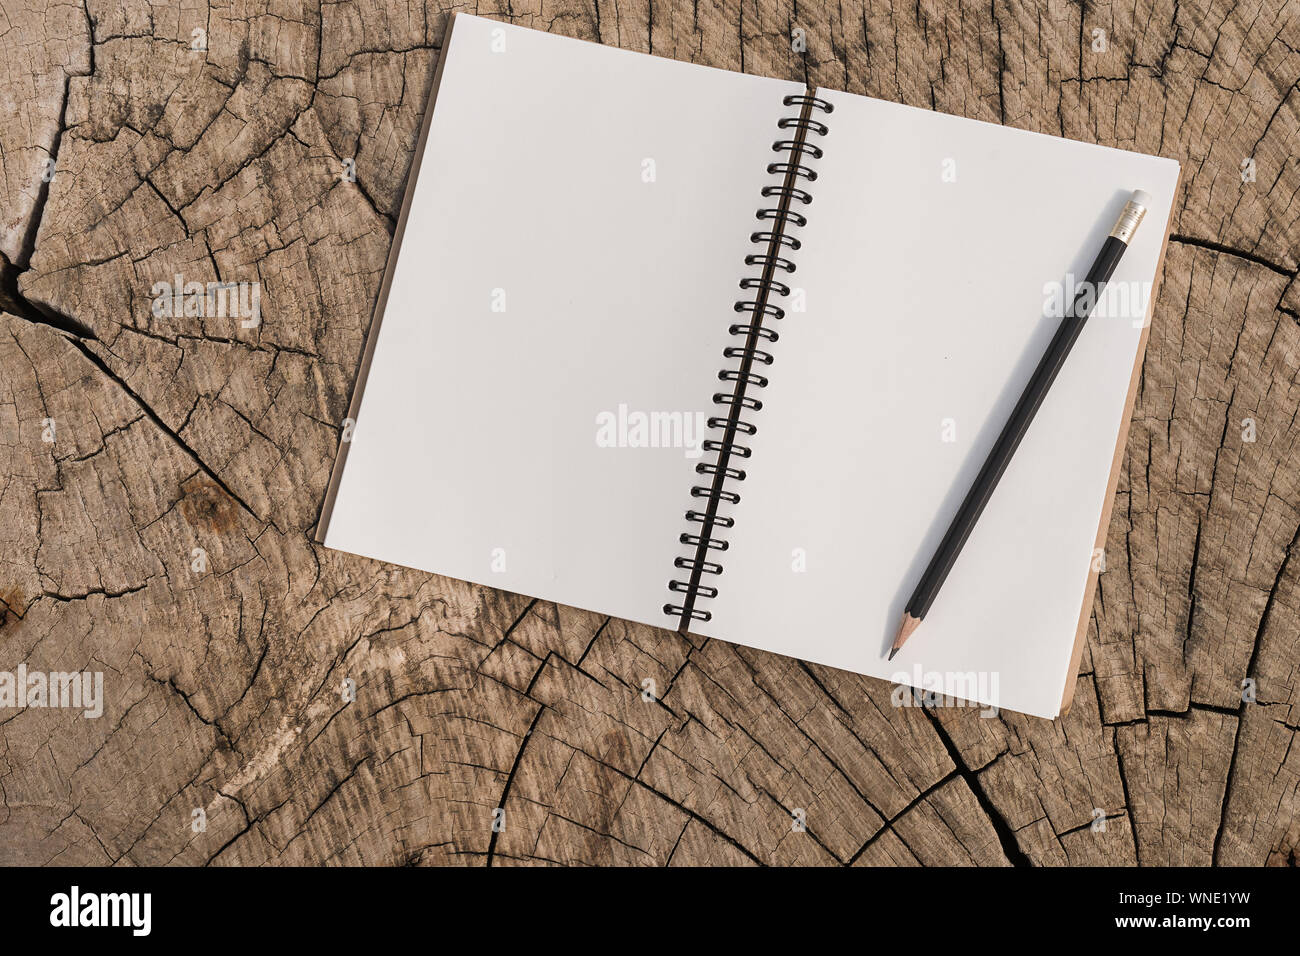 High Angle View Of Book With Pencil On Tree Stump Stock Photo